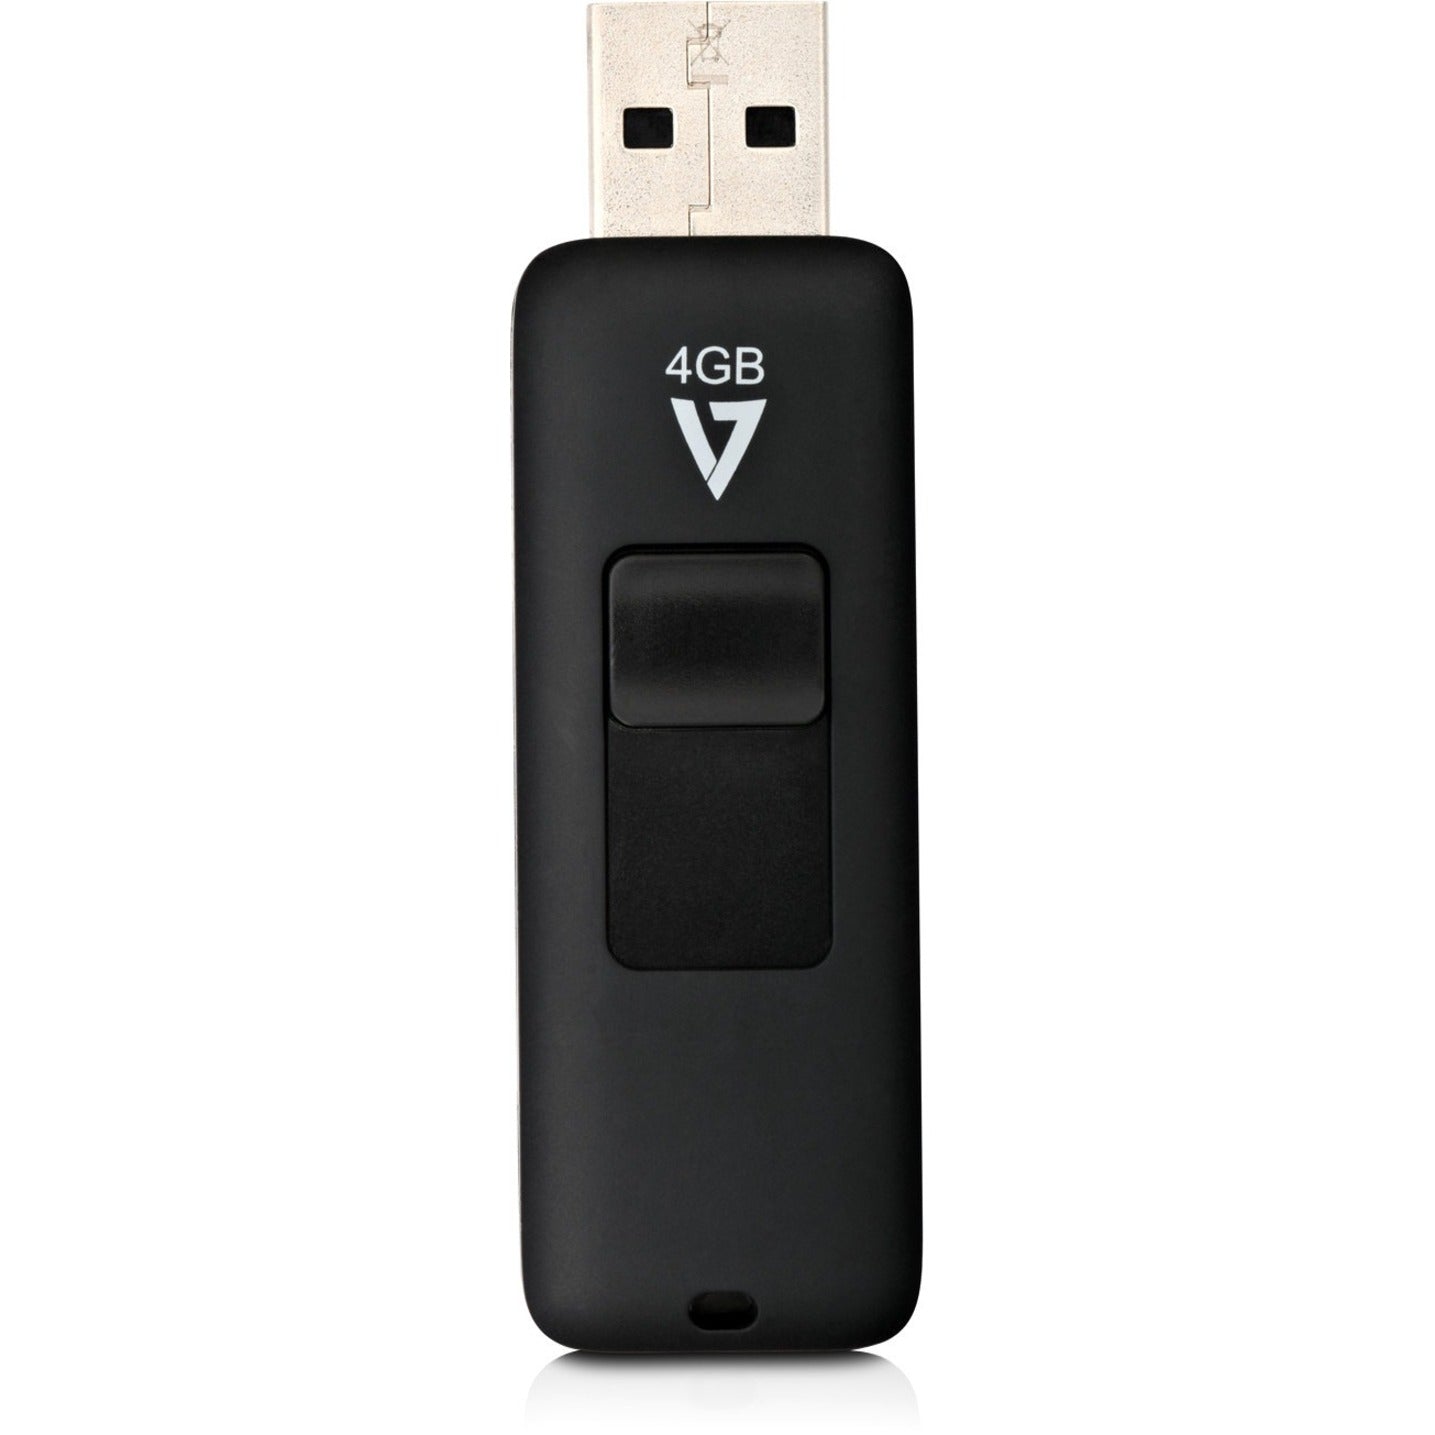 V7 VF24GAR-3N 4GB USB 2.0 Flash Drive - With Retractable USB connector, 5 Year Limited Warranty, RoHS Certified